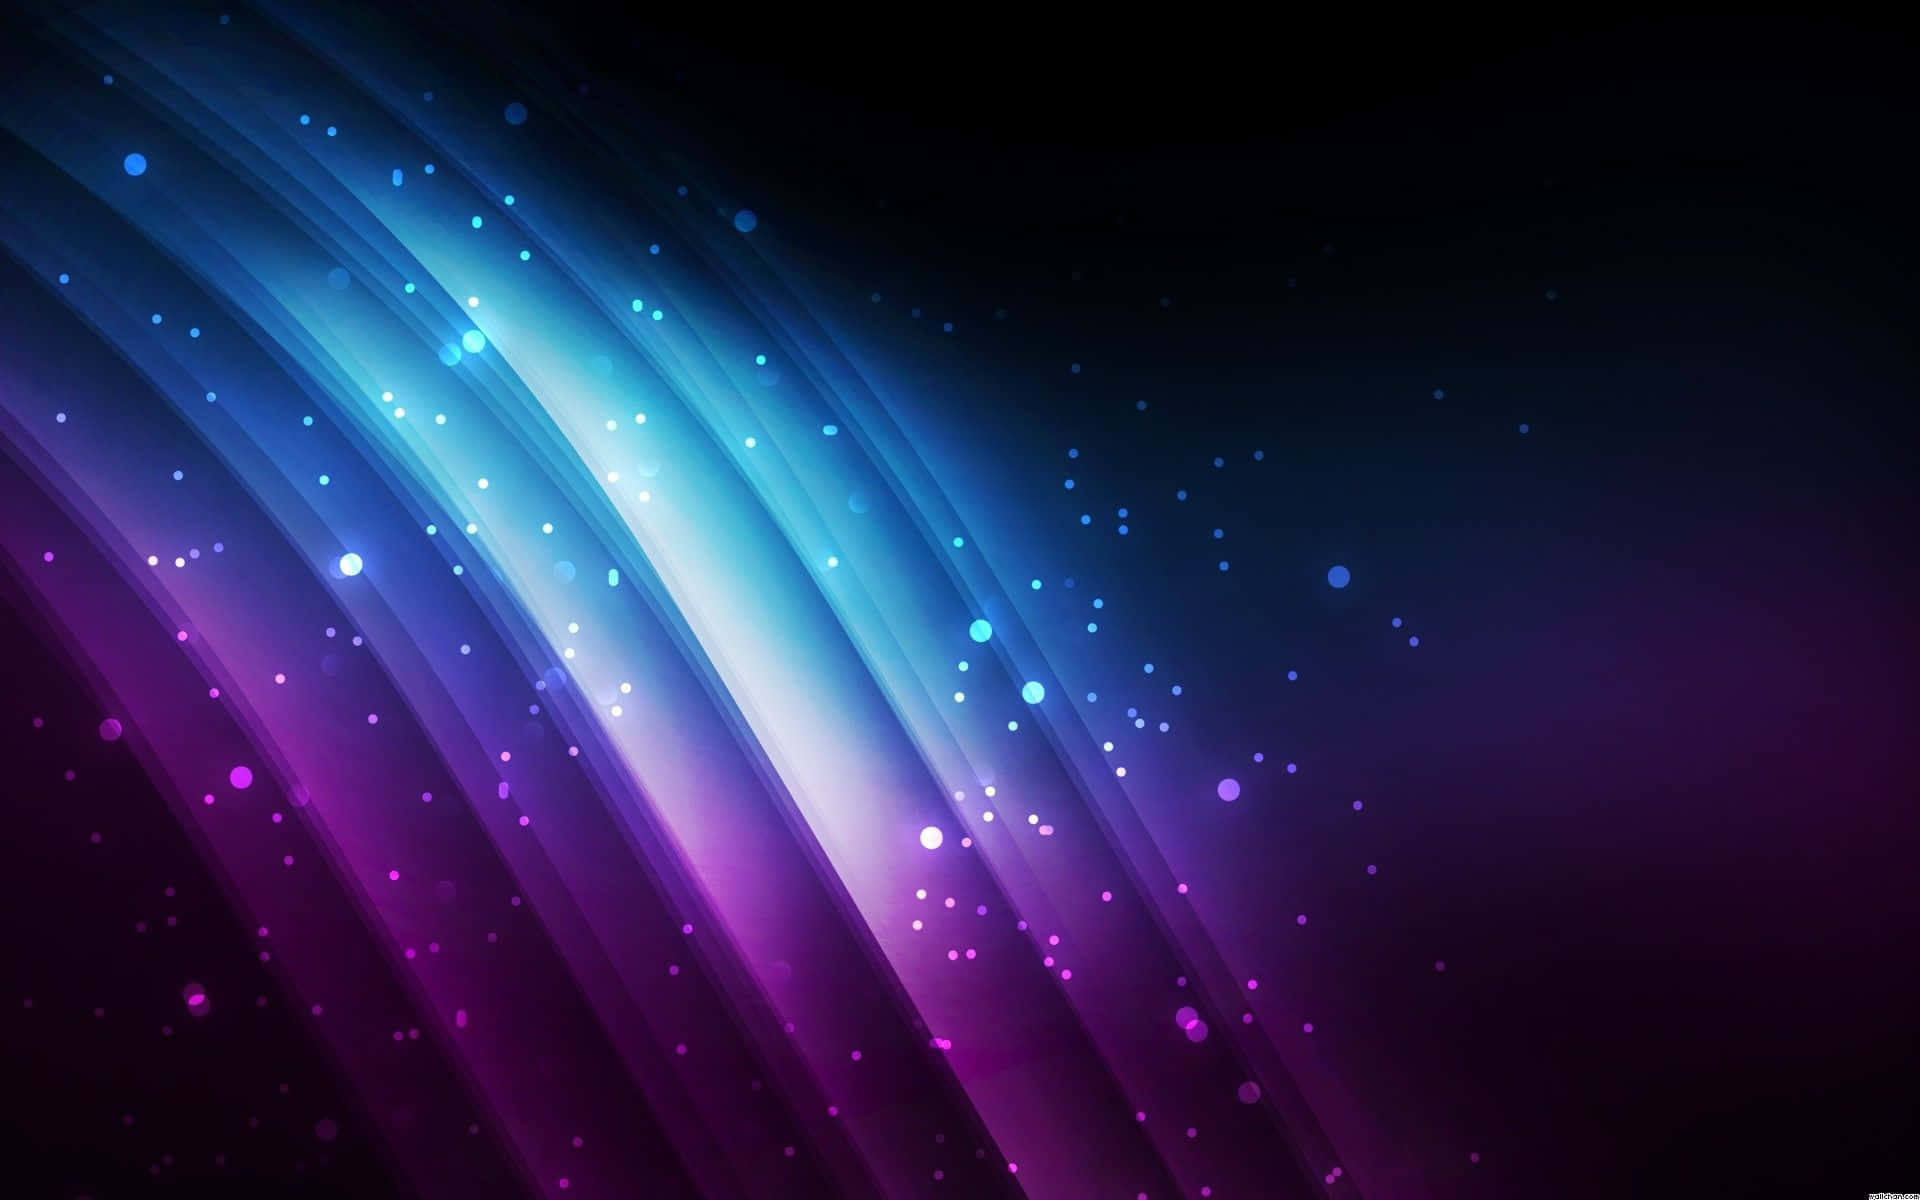 An Abstract Purple And Blue Background With Stars Wallpaper